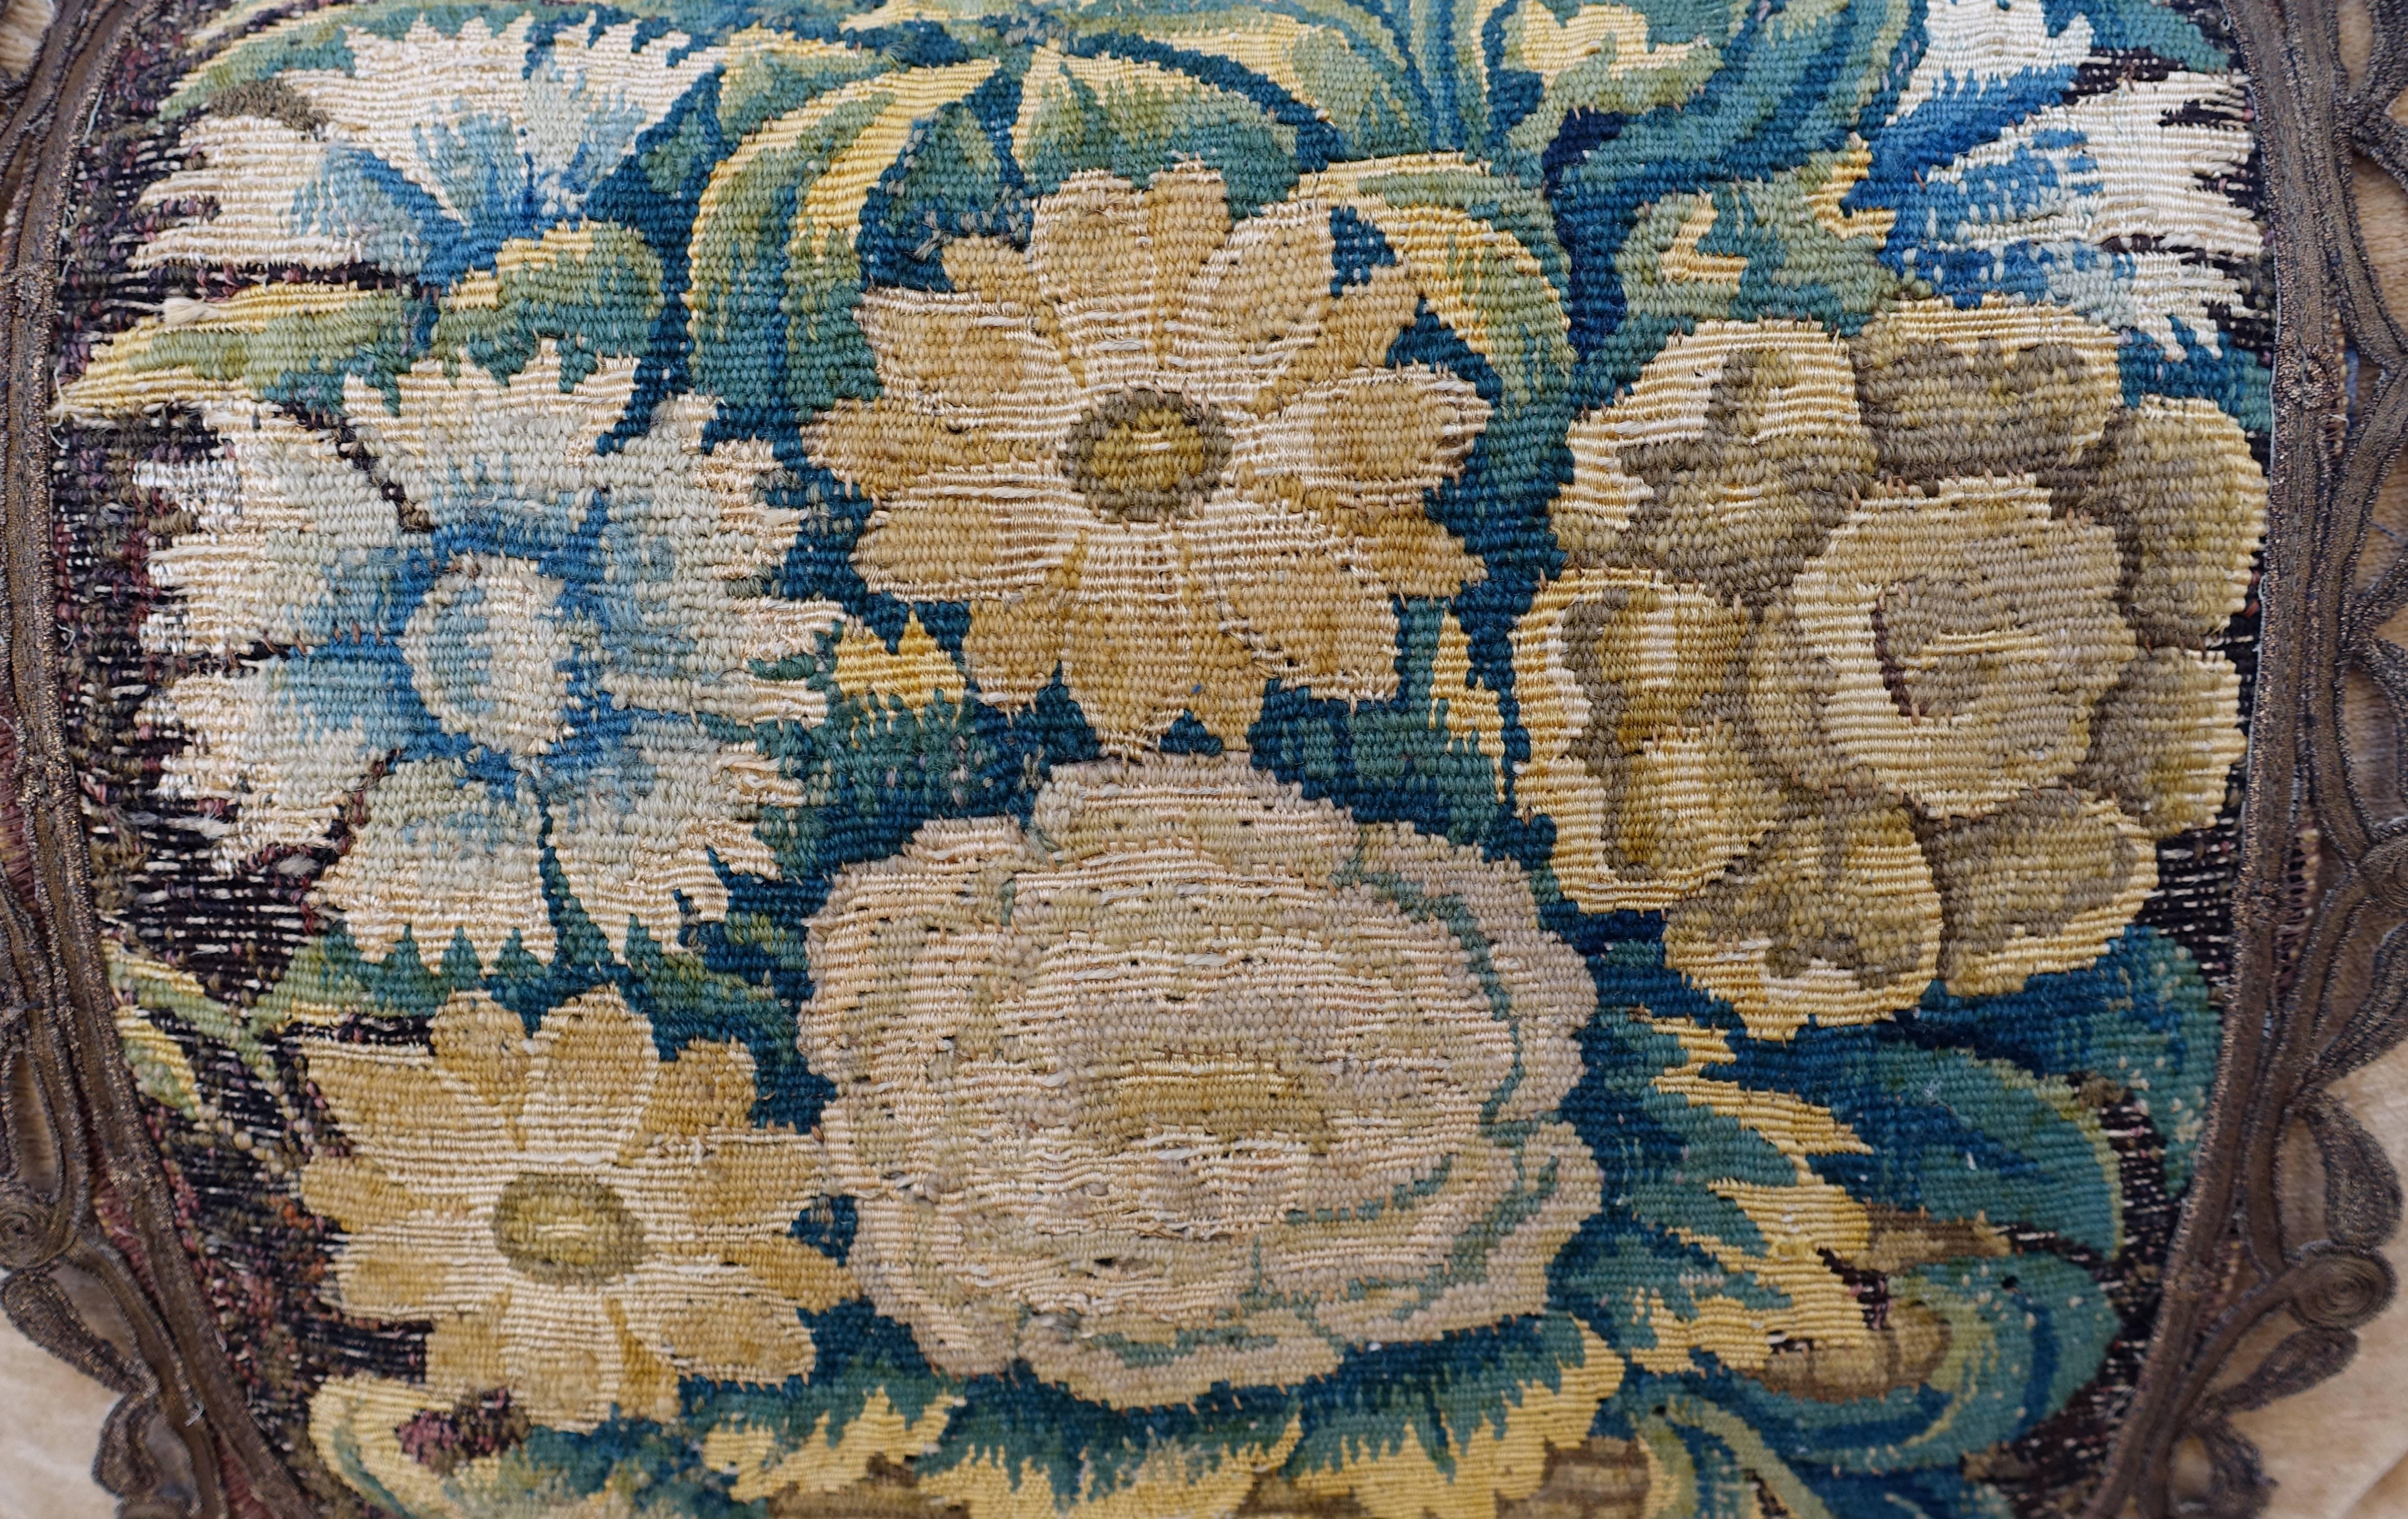 17th Century Flemish Tapestry Pillows by Melissa Levinson 2